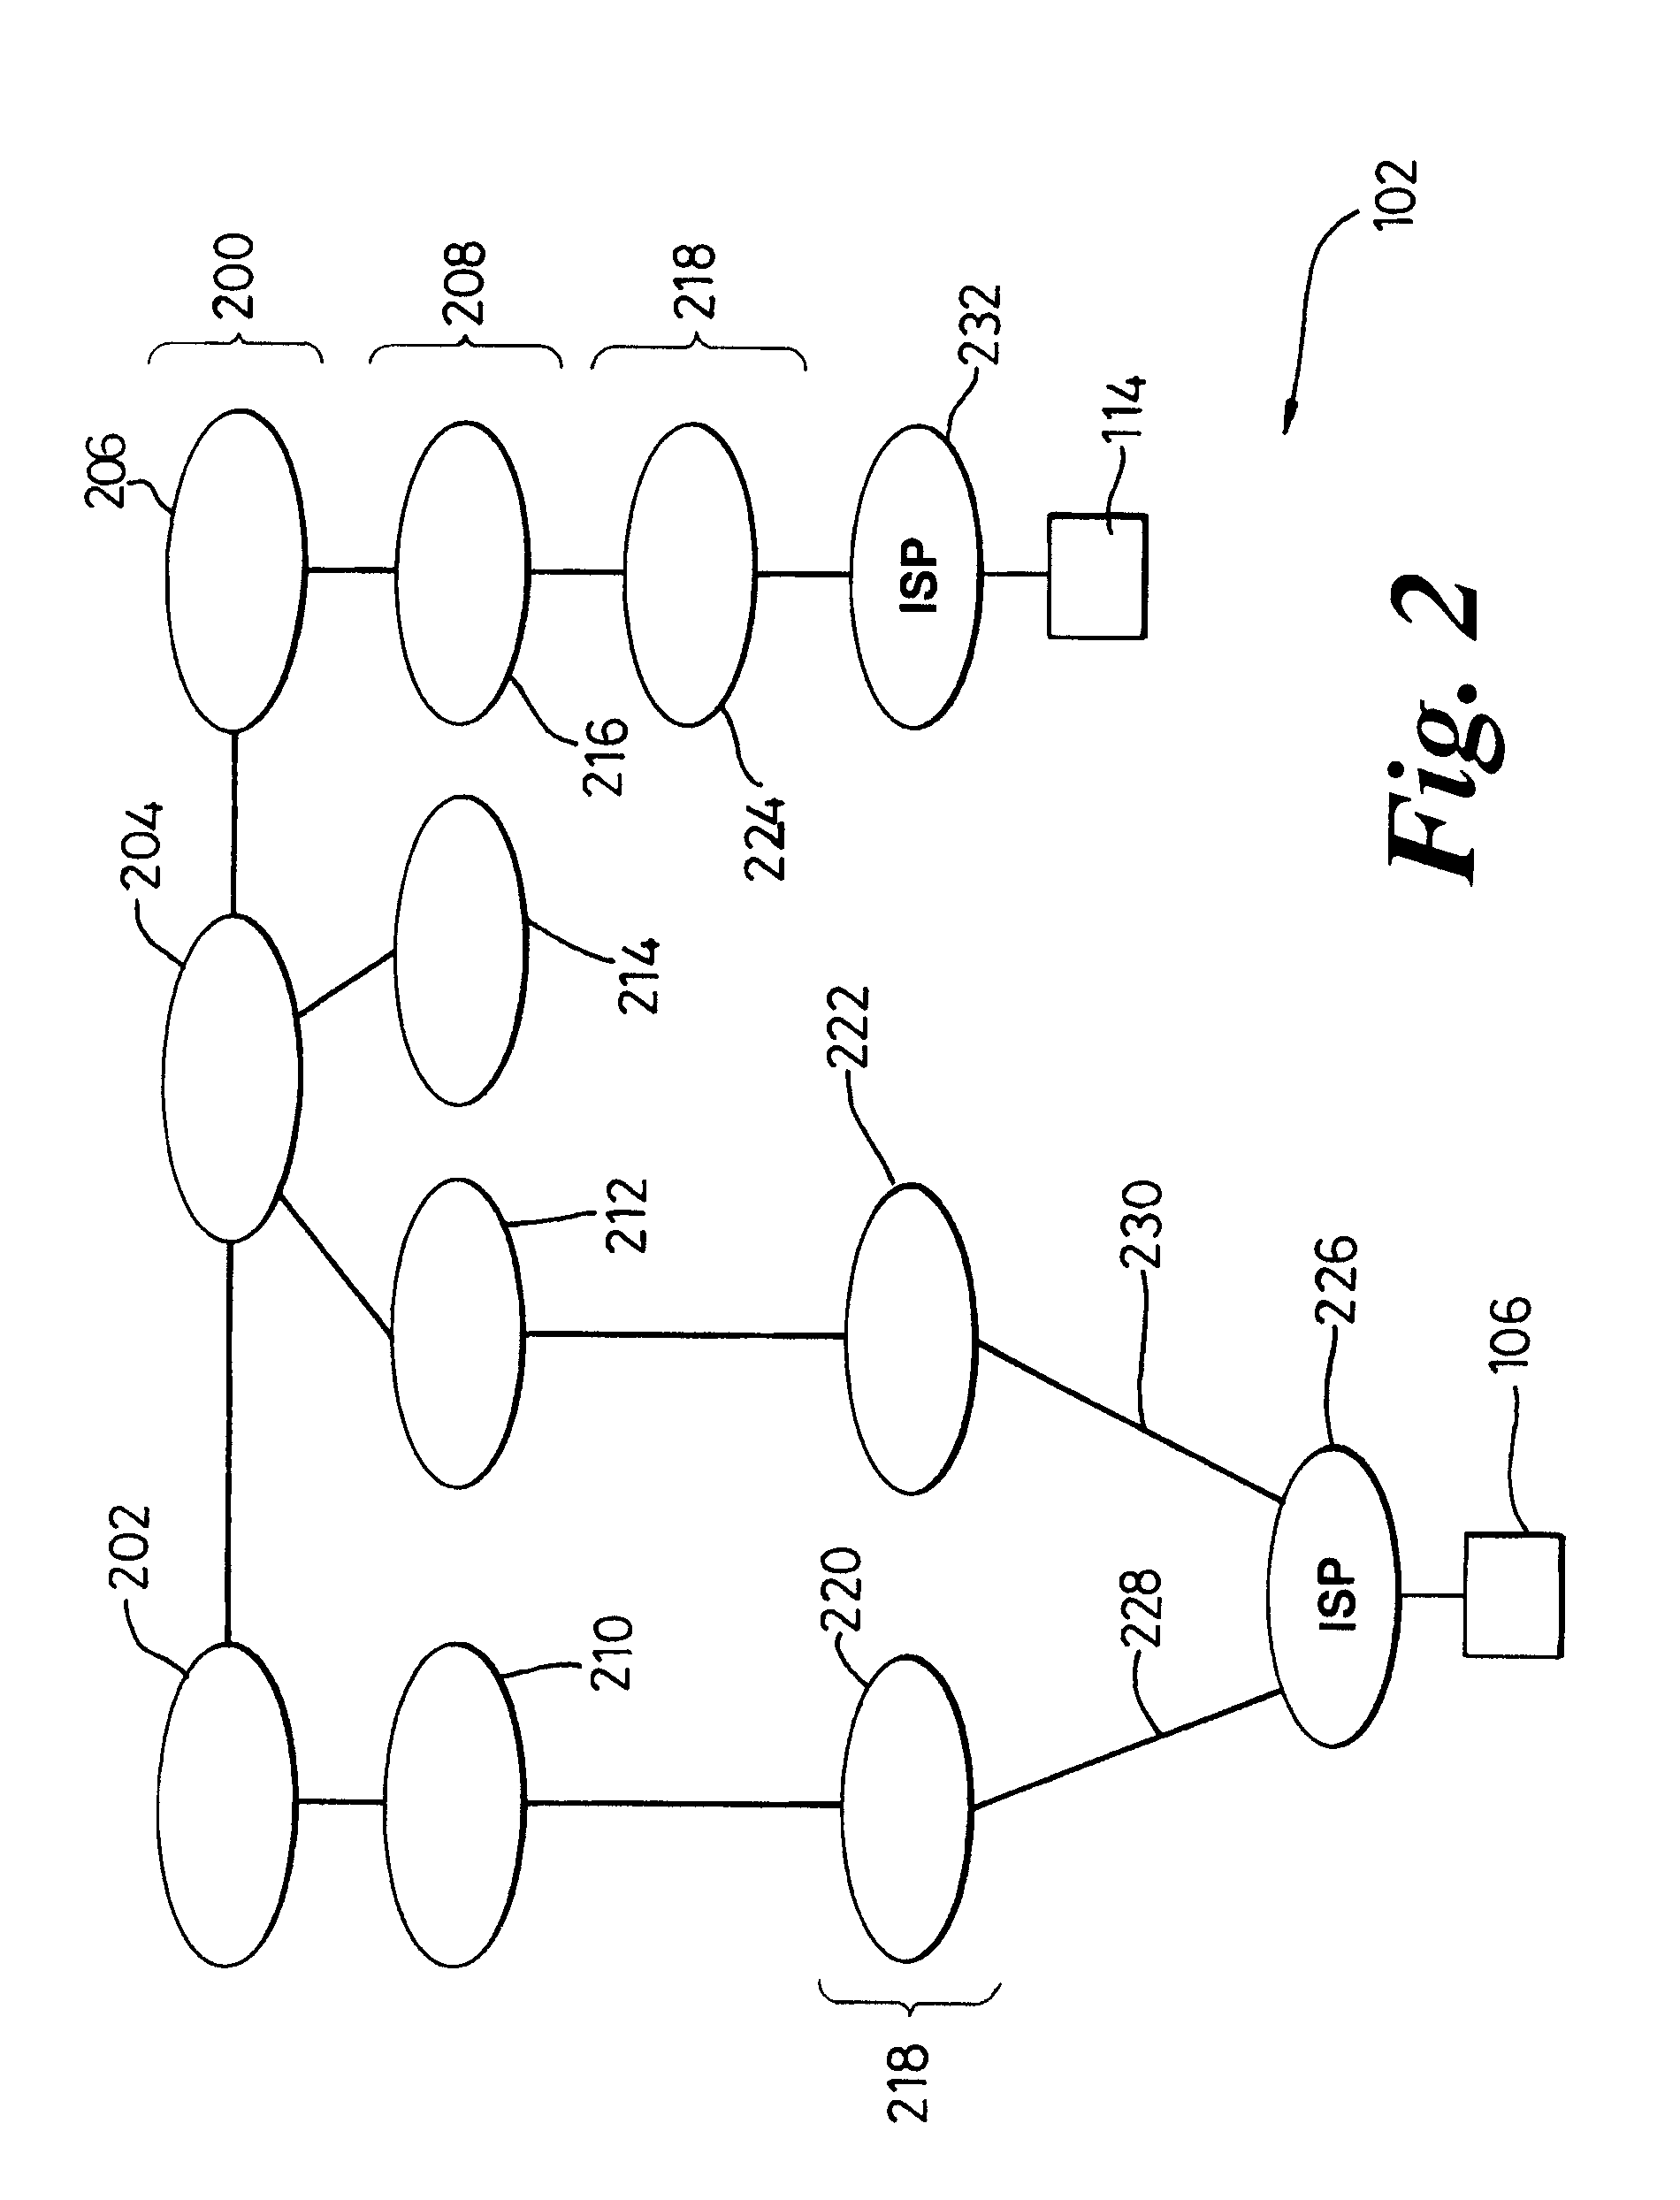 Communications system, apparatus and method therefor